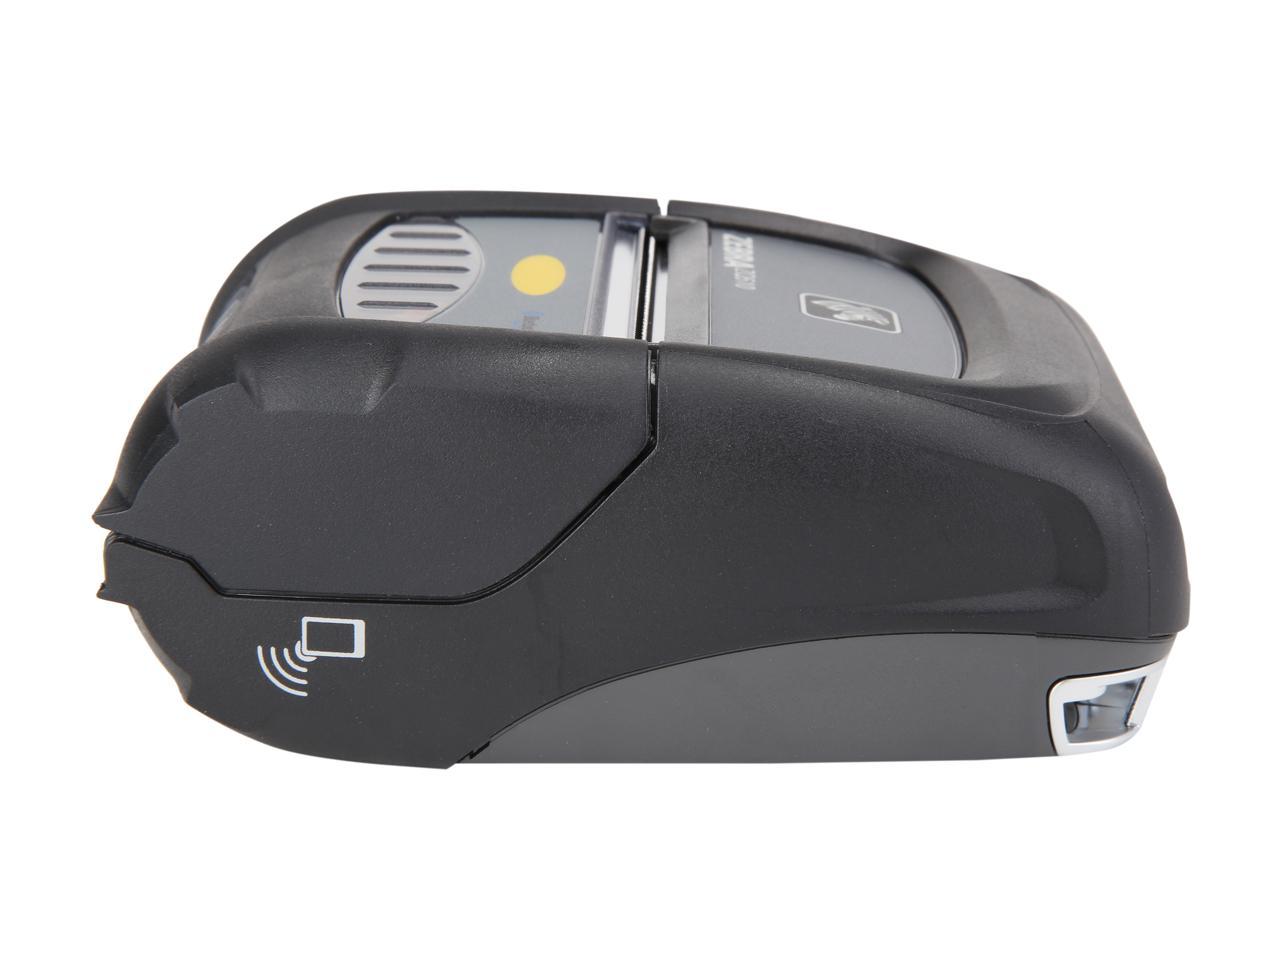 Zebra Zq510 3 Mobile Direct Thermal Receipt And Label Printer 203 Dpi Bluetooth 40 Linered 1005